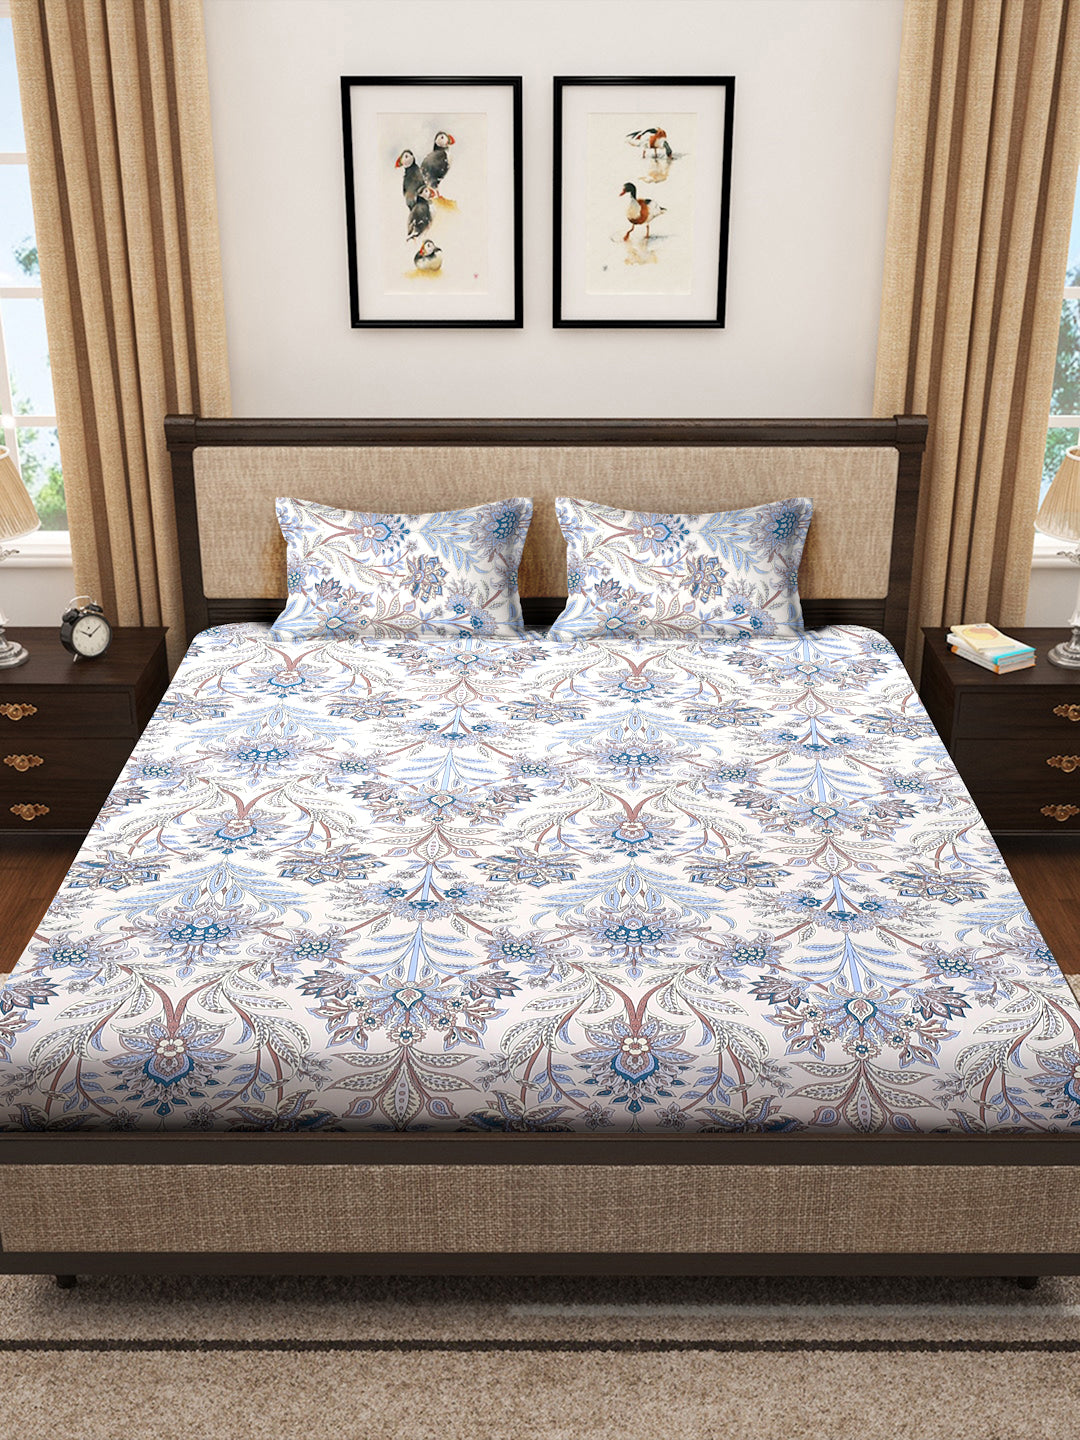 Klotthe Multicolor Floral 300 TC Cotton Blend Fitted Double Bedsheet with 2 Pillow Covers